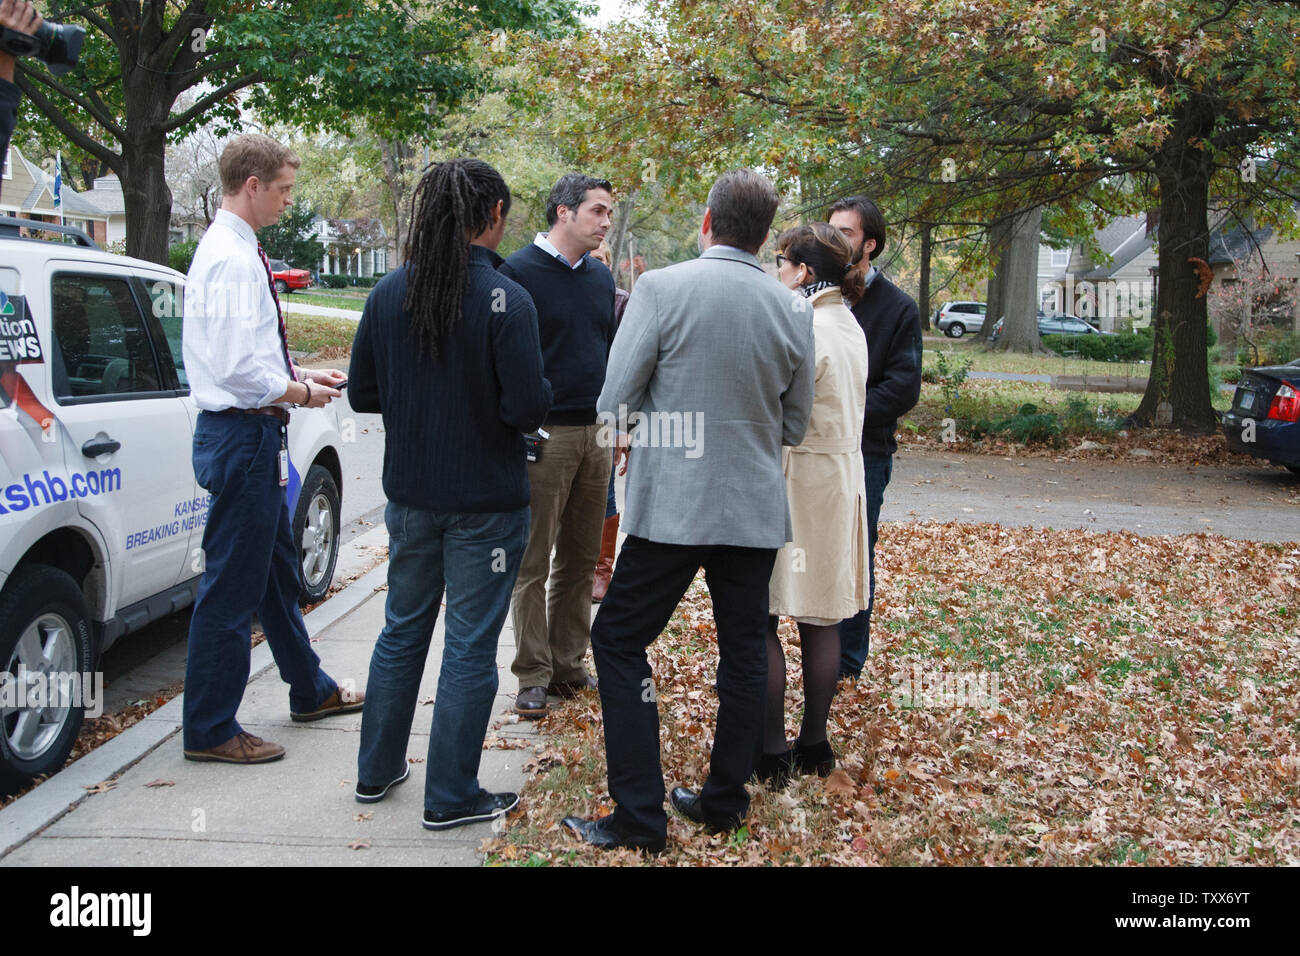 Independent Kansas Senate candidate Greg Orman greets potential voters as he goes door-to-door during a campaign stop in Roeland Park, Kansas, on November 3, 2014. UPI/Jeff Moffett Stock Photo